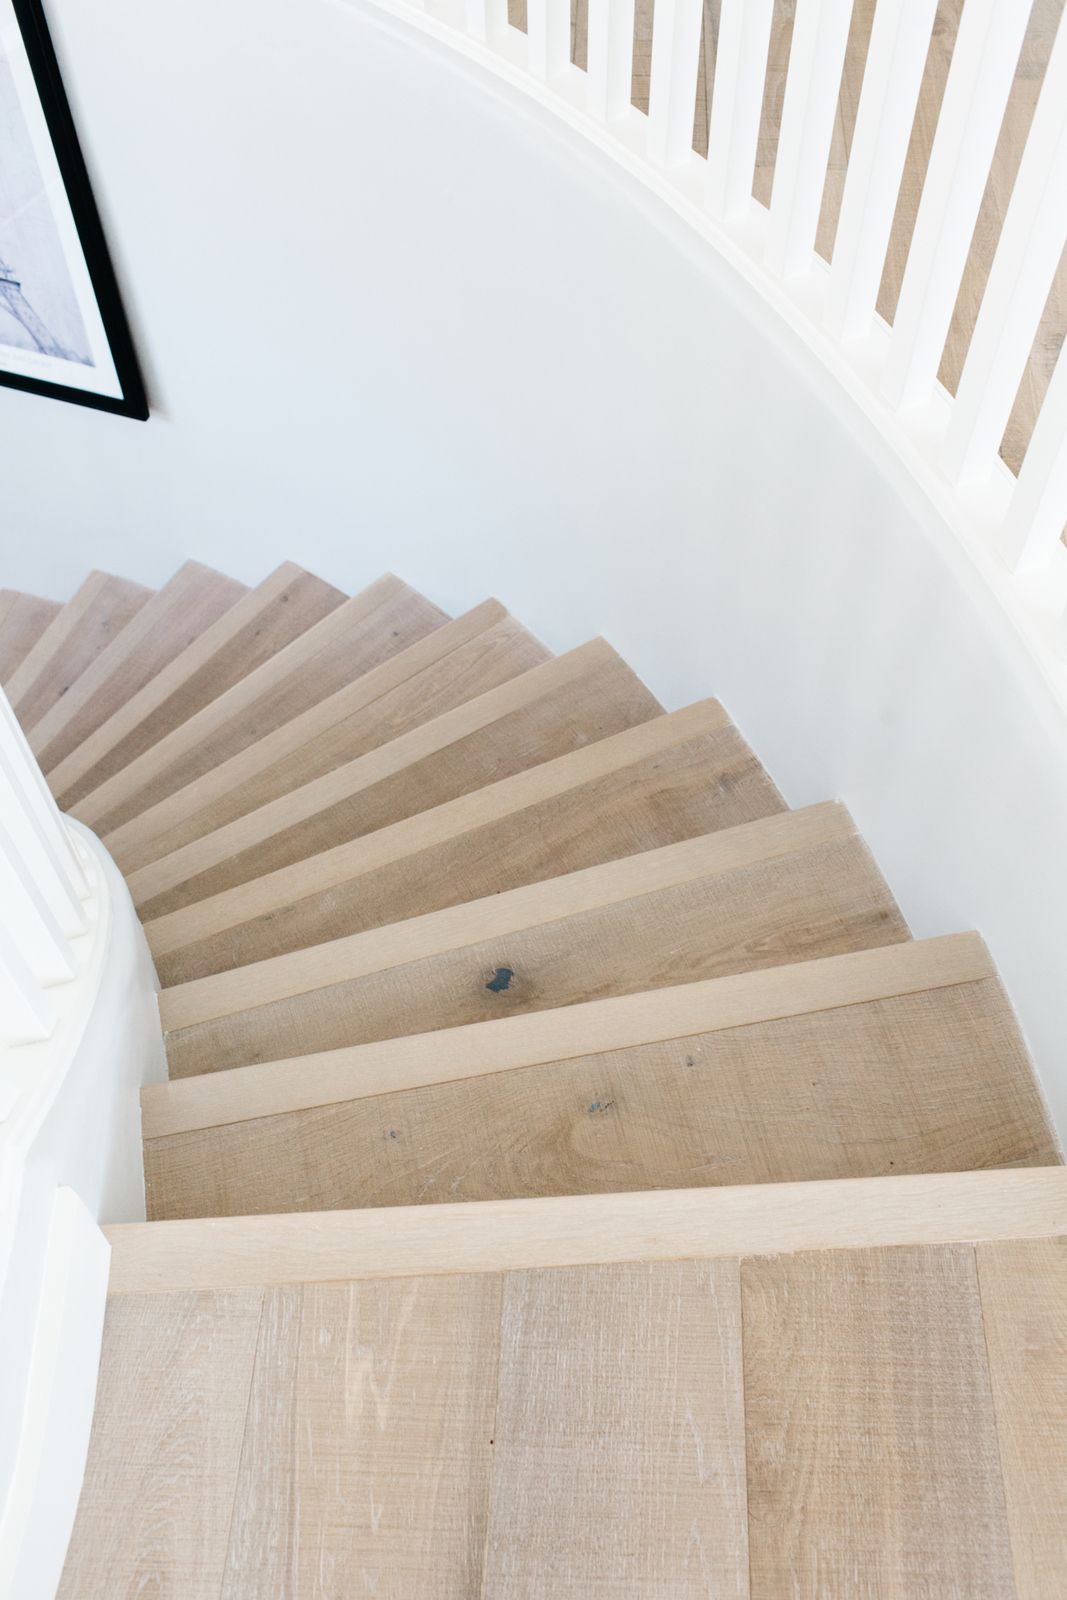 Guide to choosing a hardwood supplier